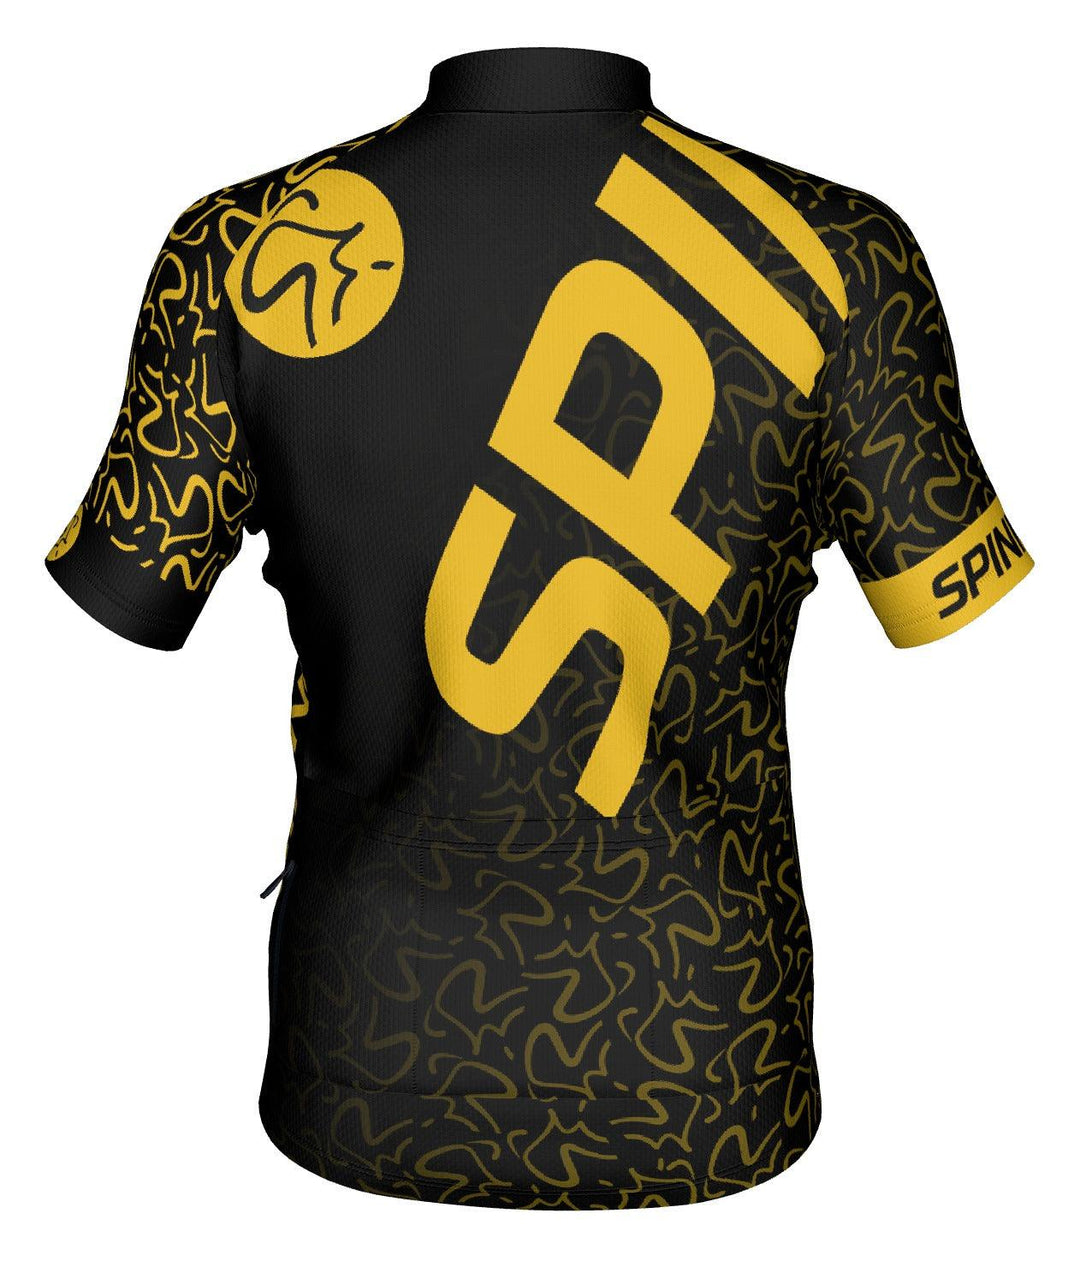 Pure Gold Spinning® Cycle Jersey - Athleticum Fitness